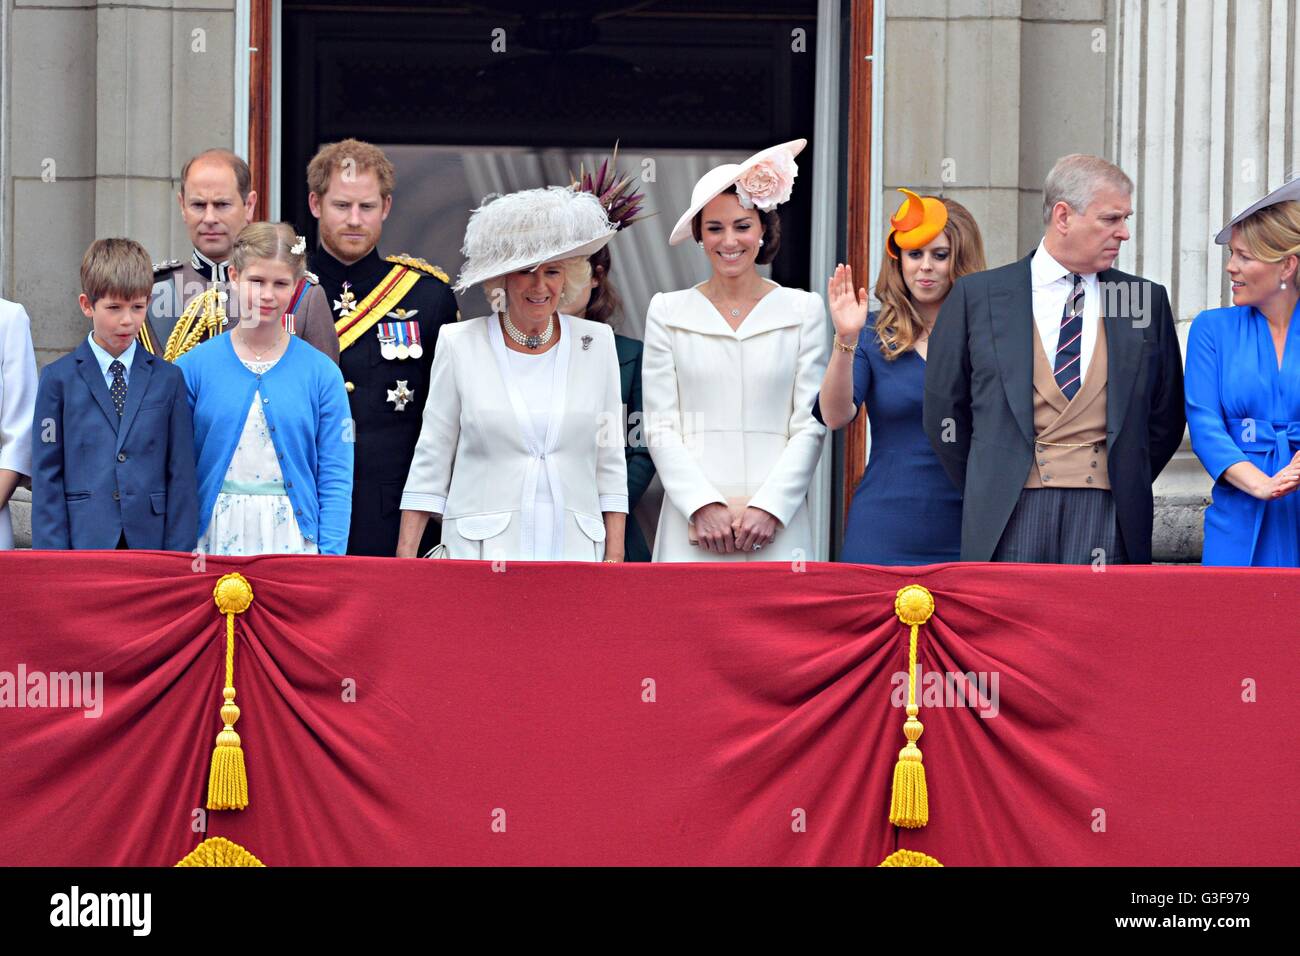 Members of the royal family on the balcony of Buckingham Palace, central London after they attended the Trooping the Colour ceremony as the Queen celebrates her official birthday today. Stock Photo